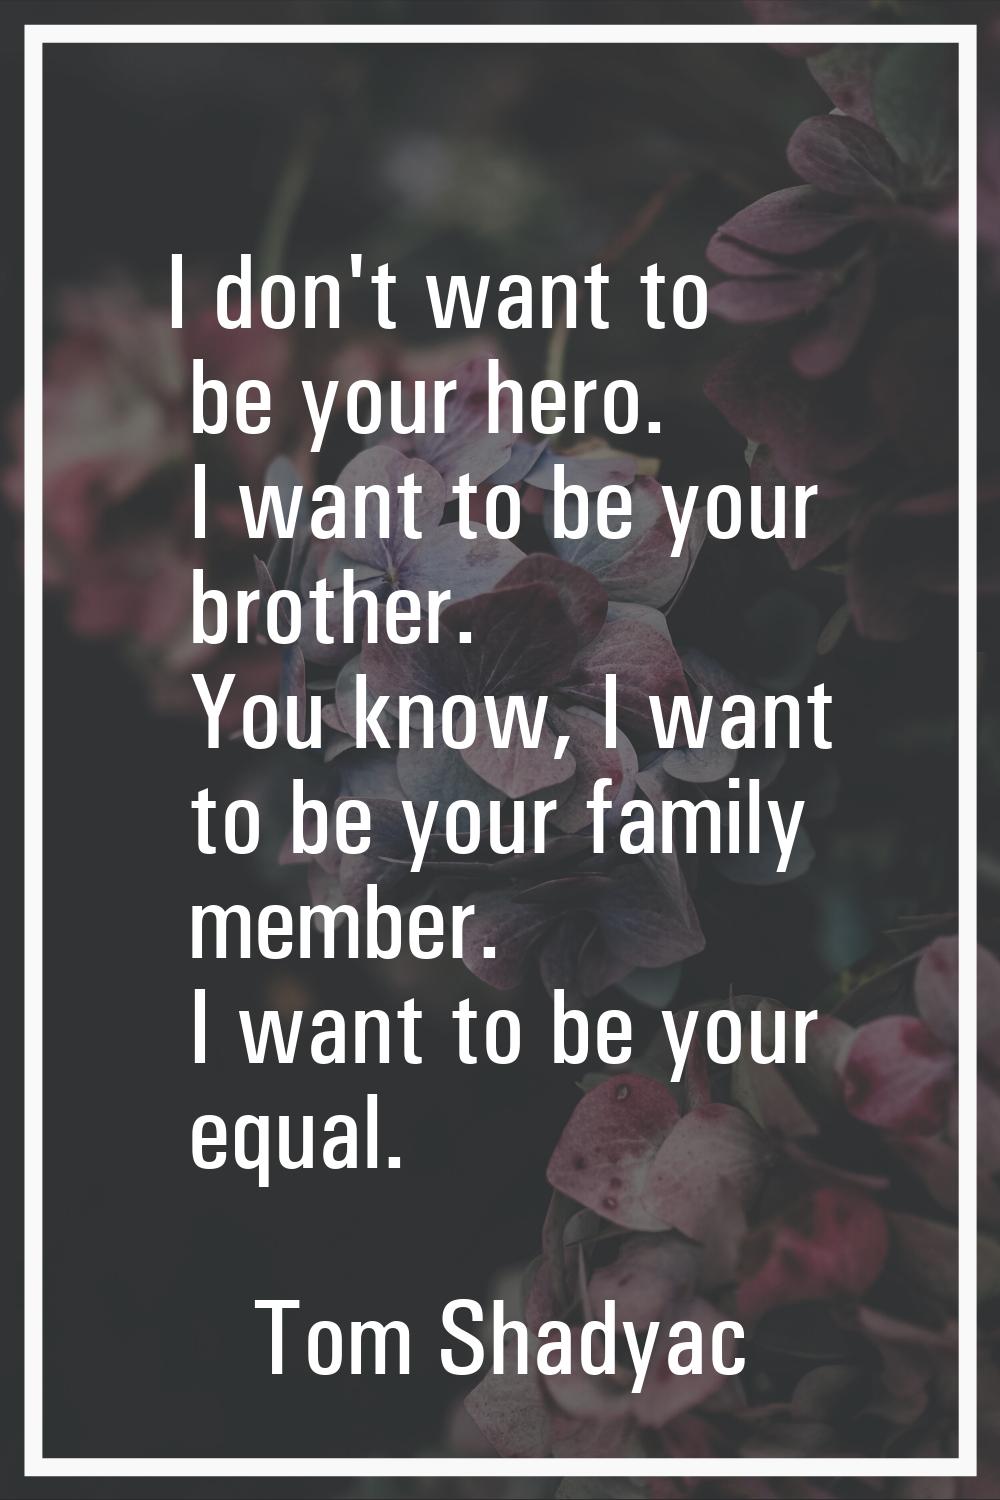 I don't want to be your hero. I want to be your brother. You know, I want to be your family member.